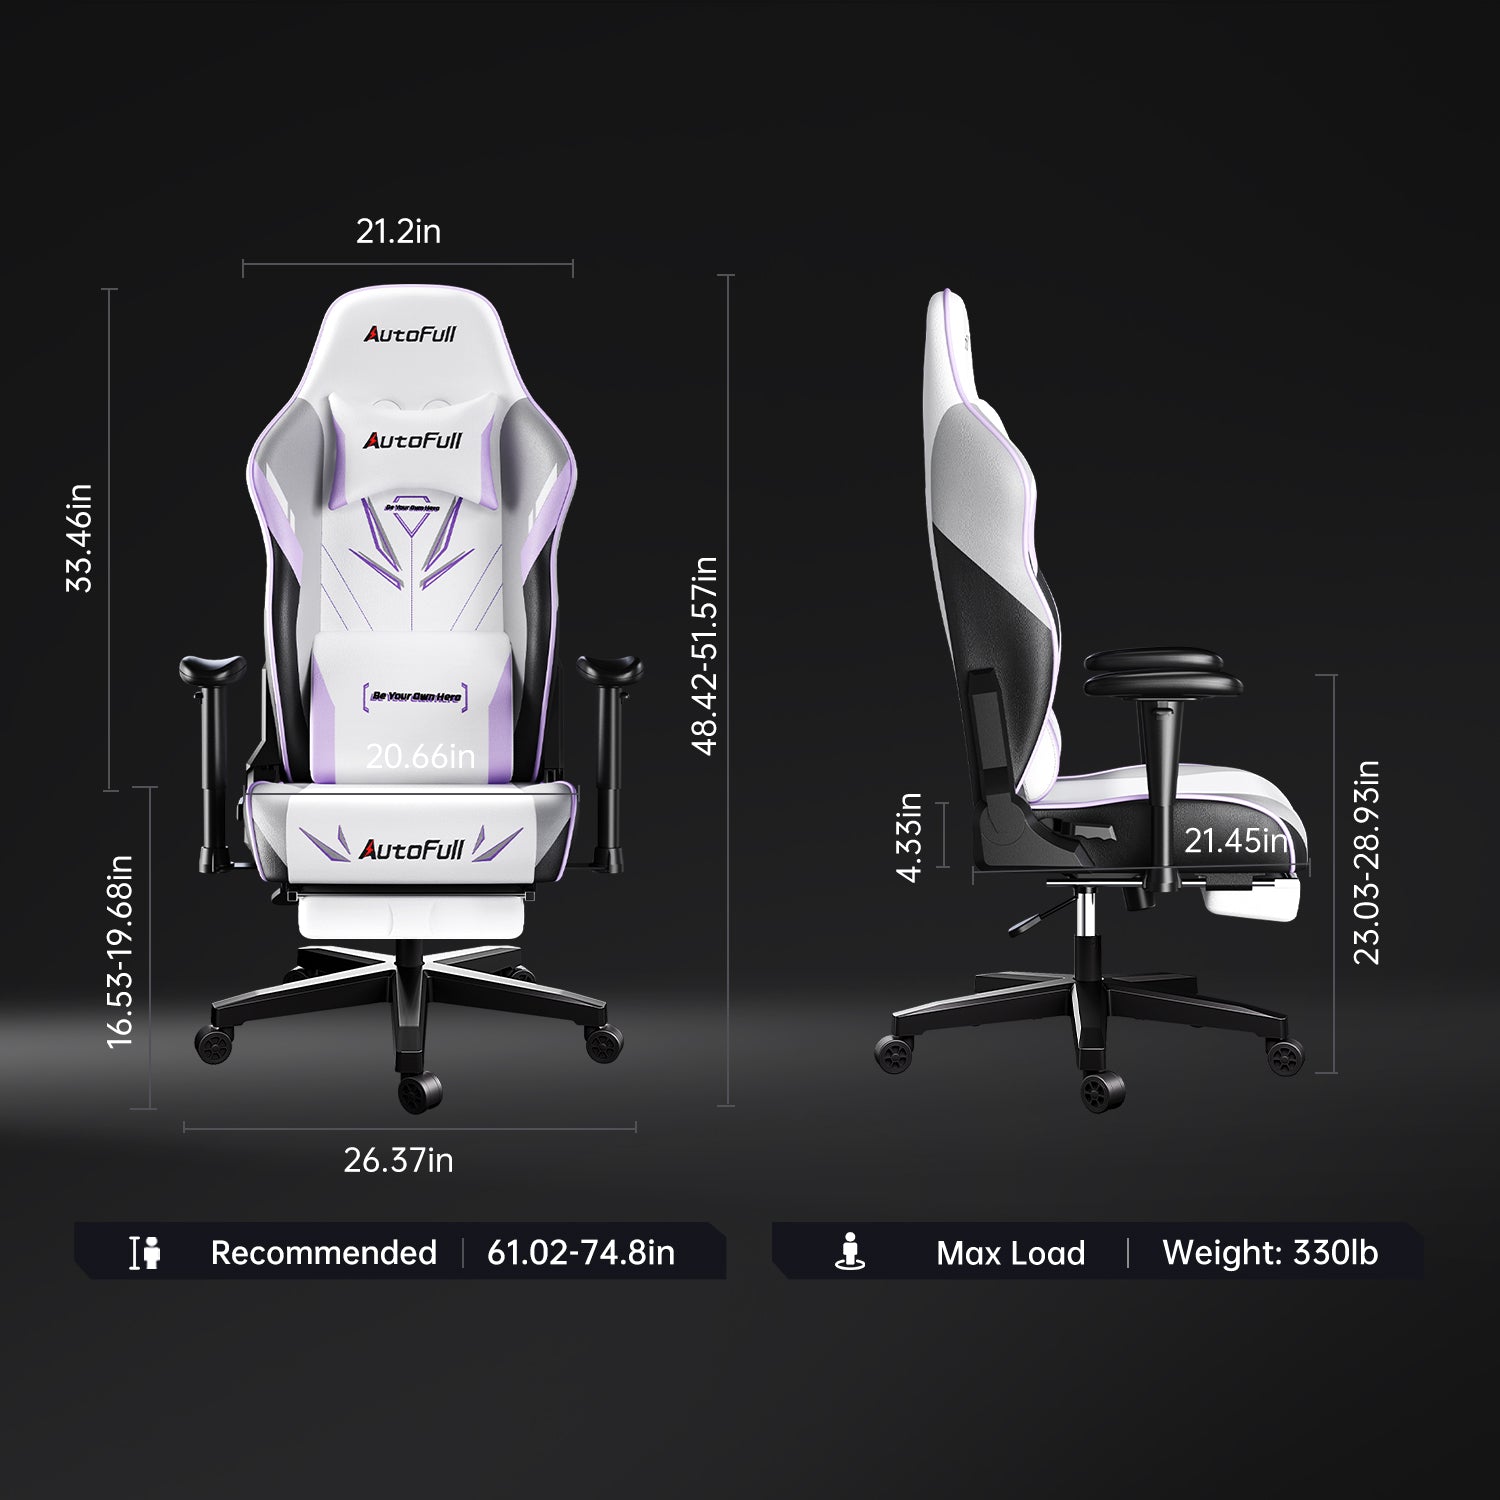 AutoFull Gaming Chair, Mechanical Warrior Style, White Color